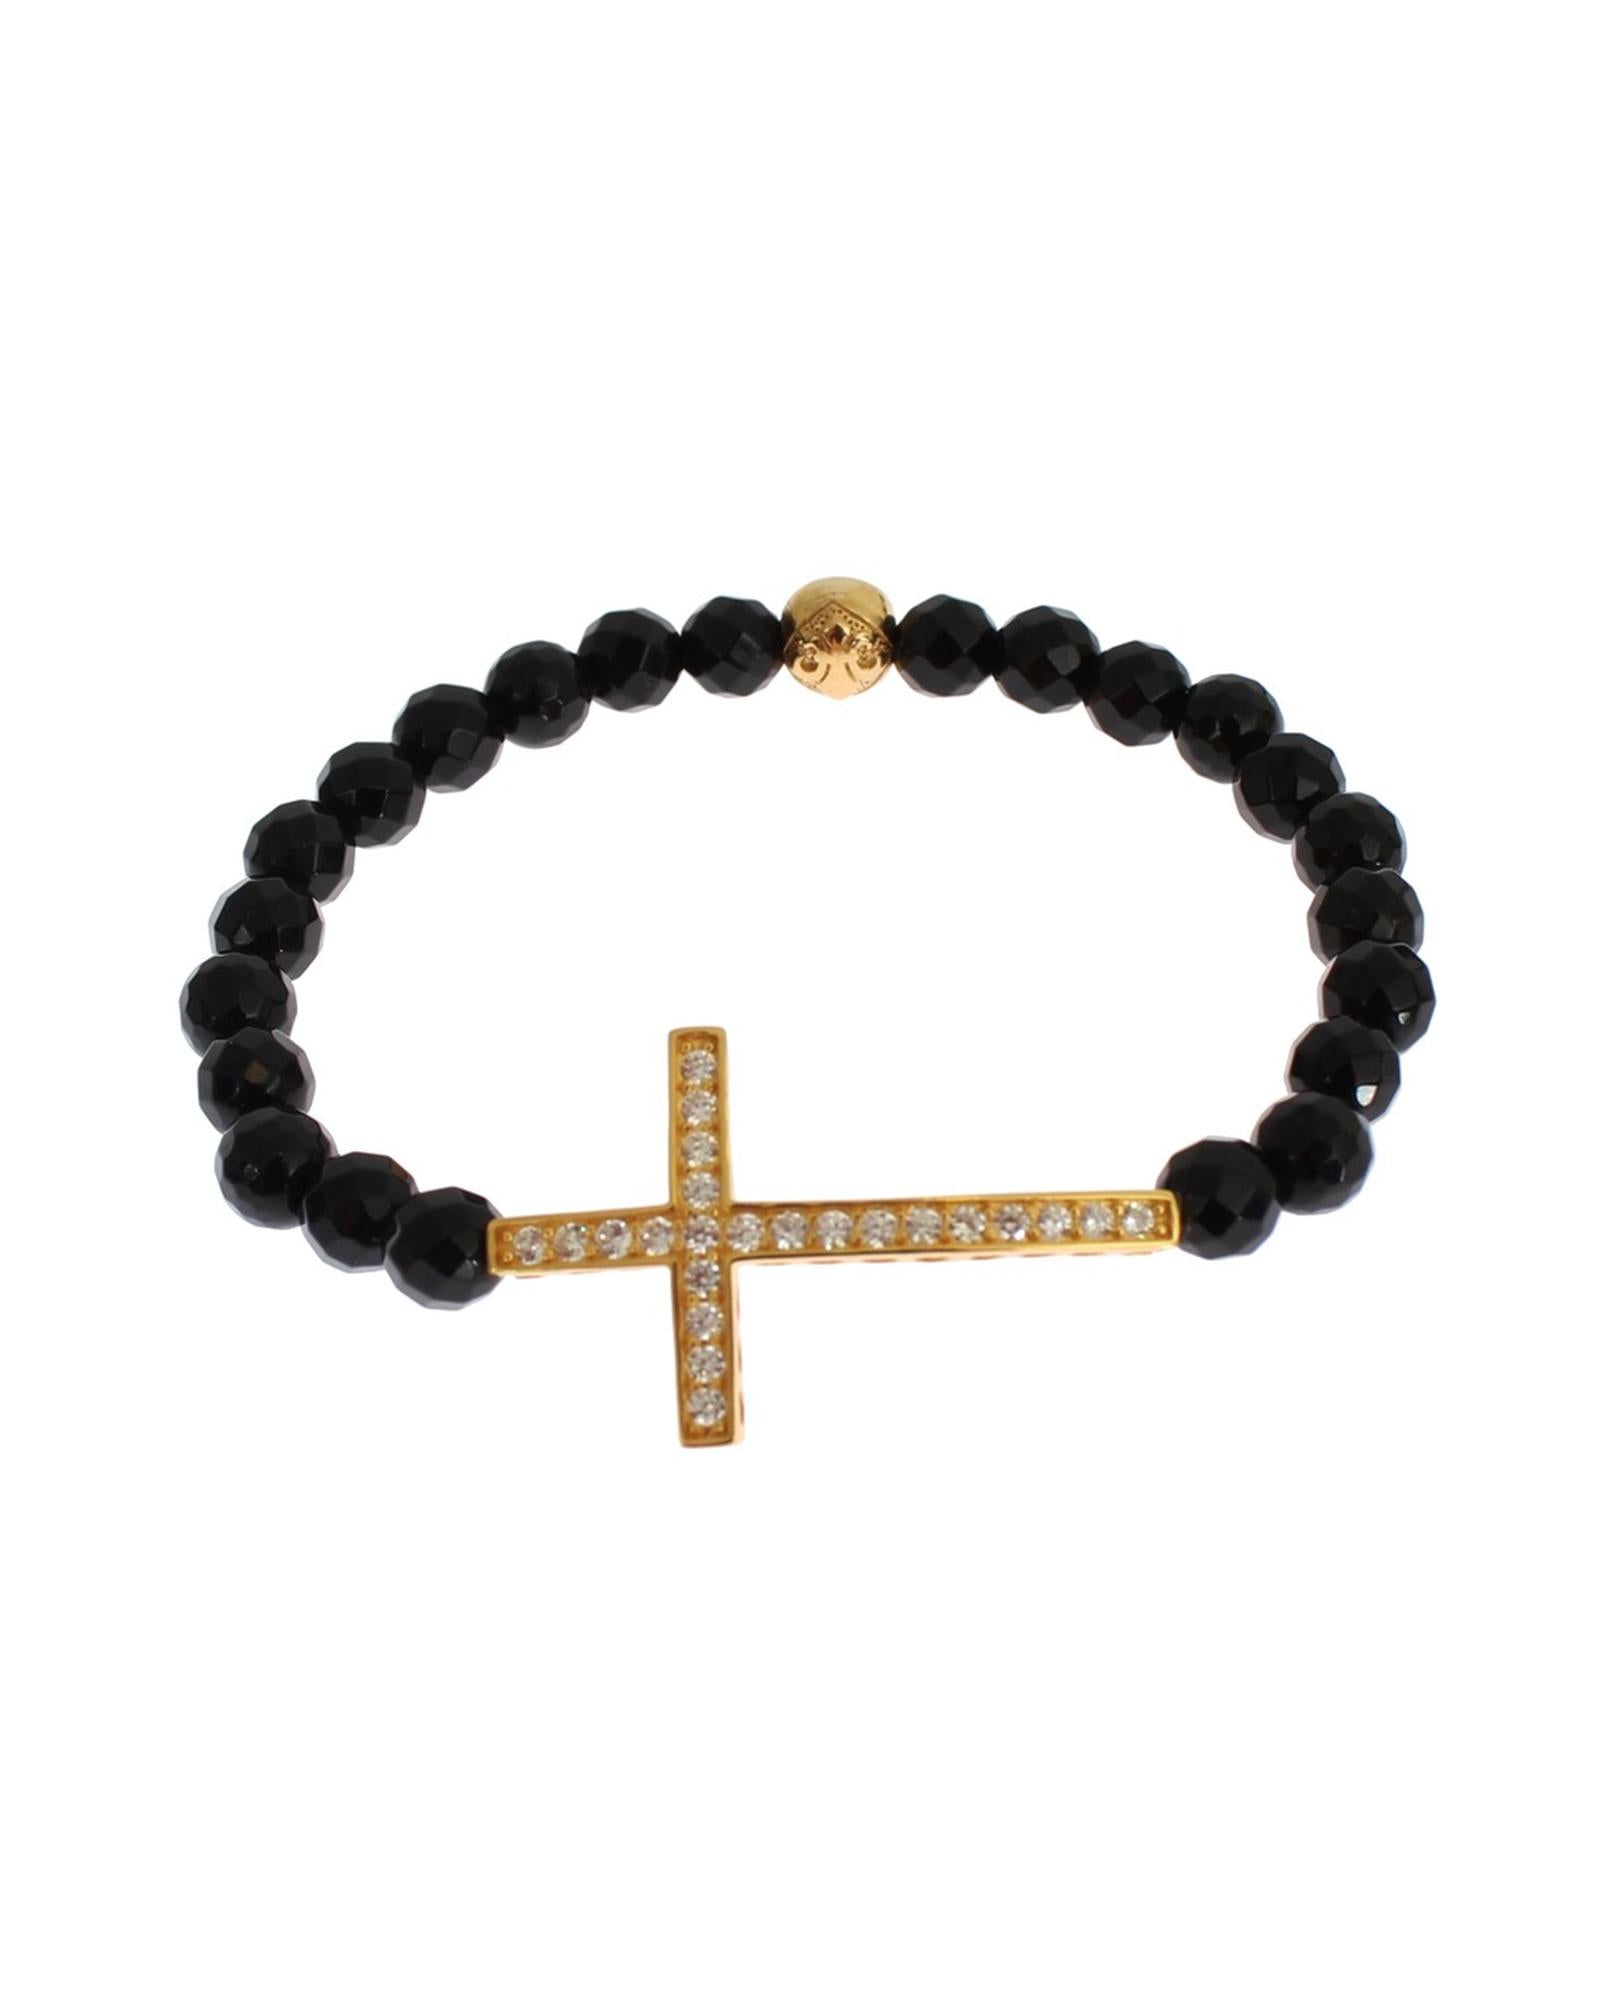 NIALAYA Gold Plated Sterling Silver Bracelet with Agate Stone and CZ Diamond Cross XS Women